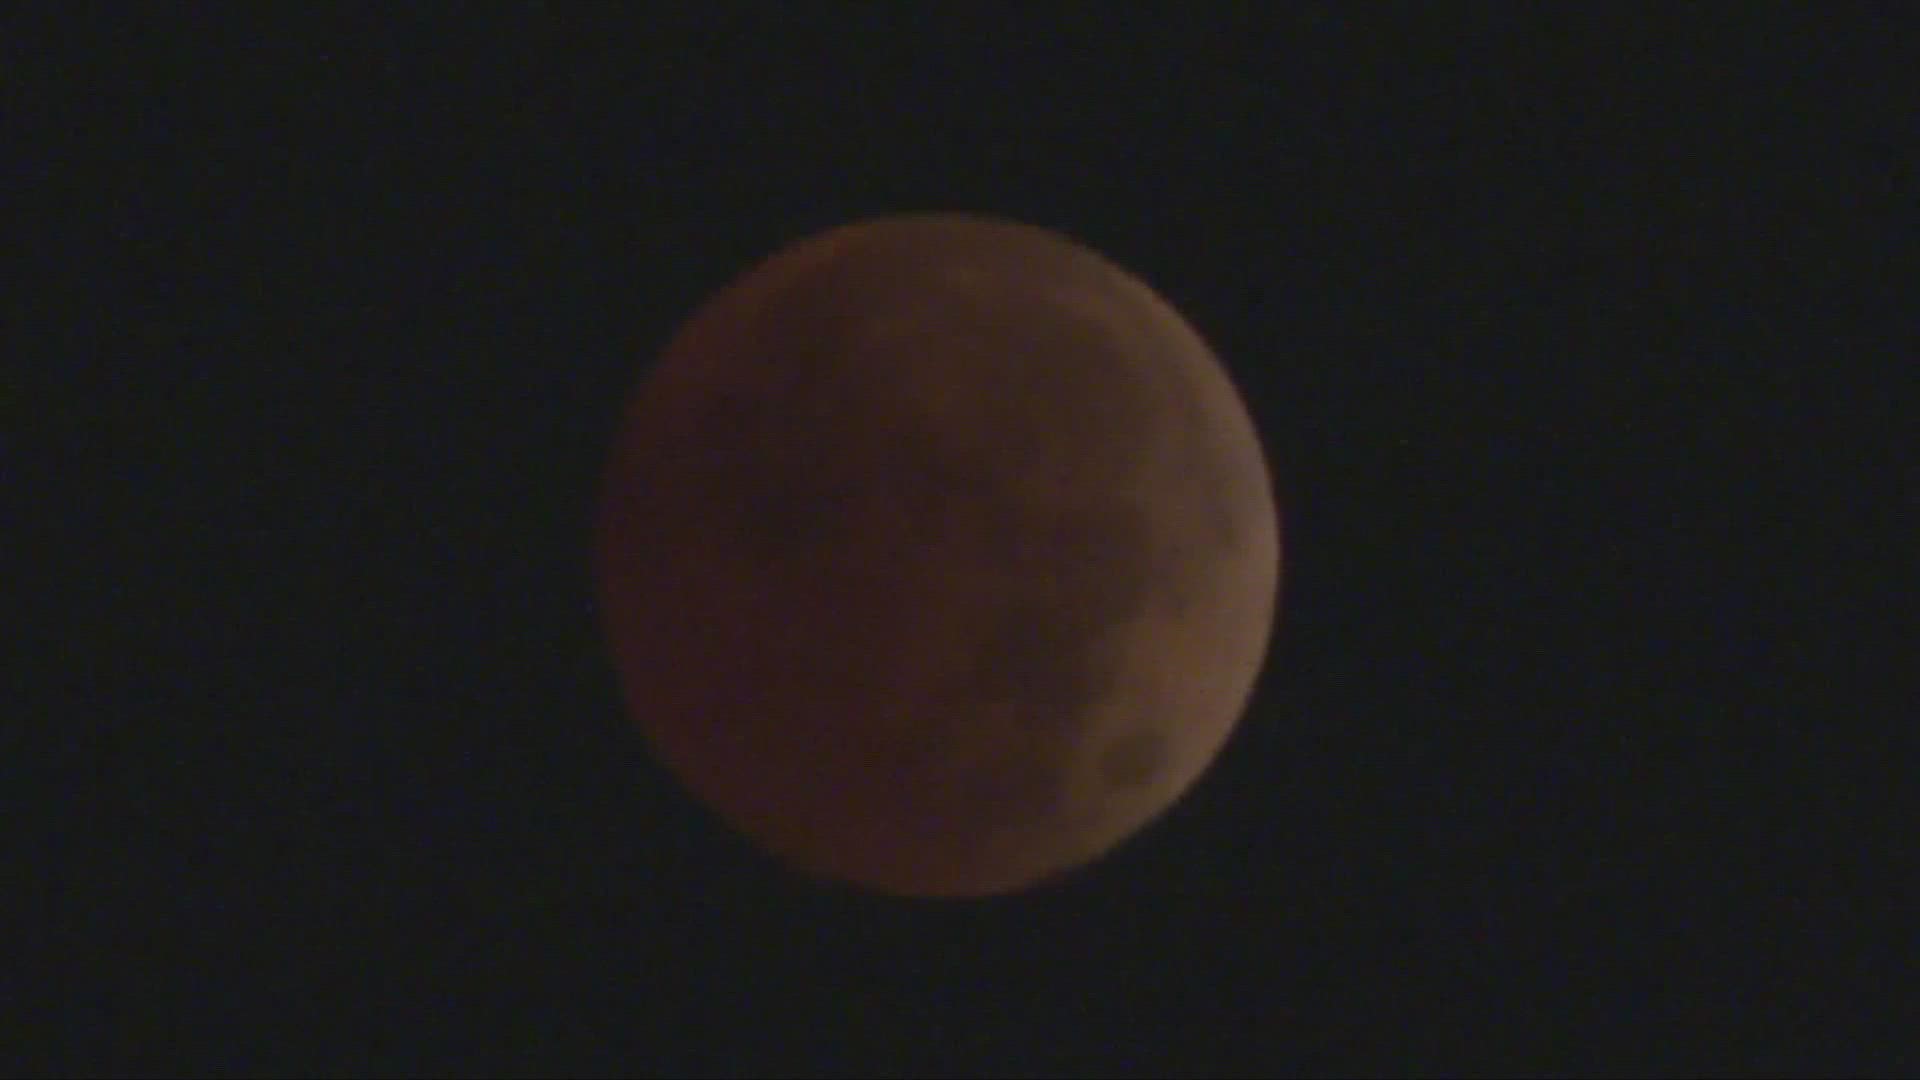 Did you see it? Here's some awesome video of the blood moon lunar eclipse.